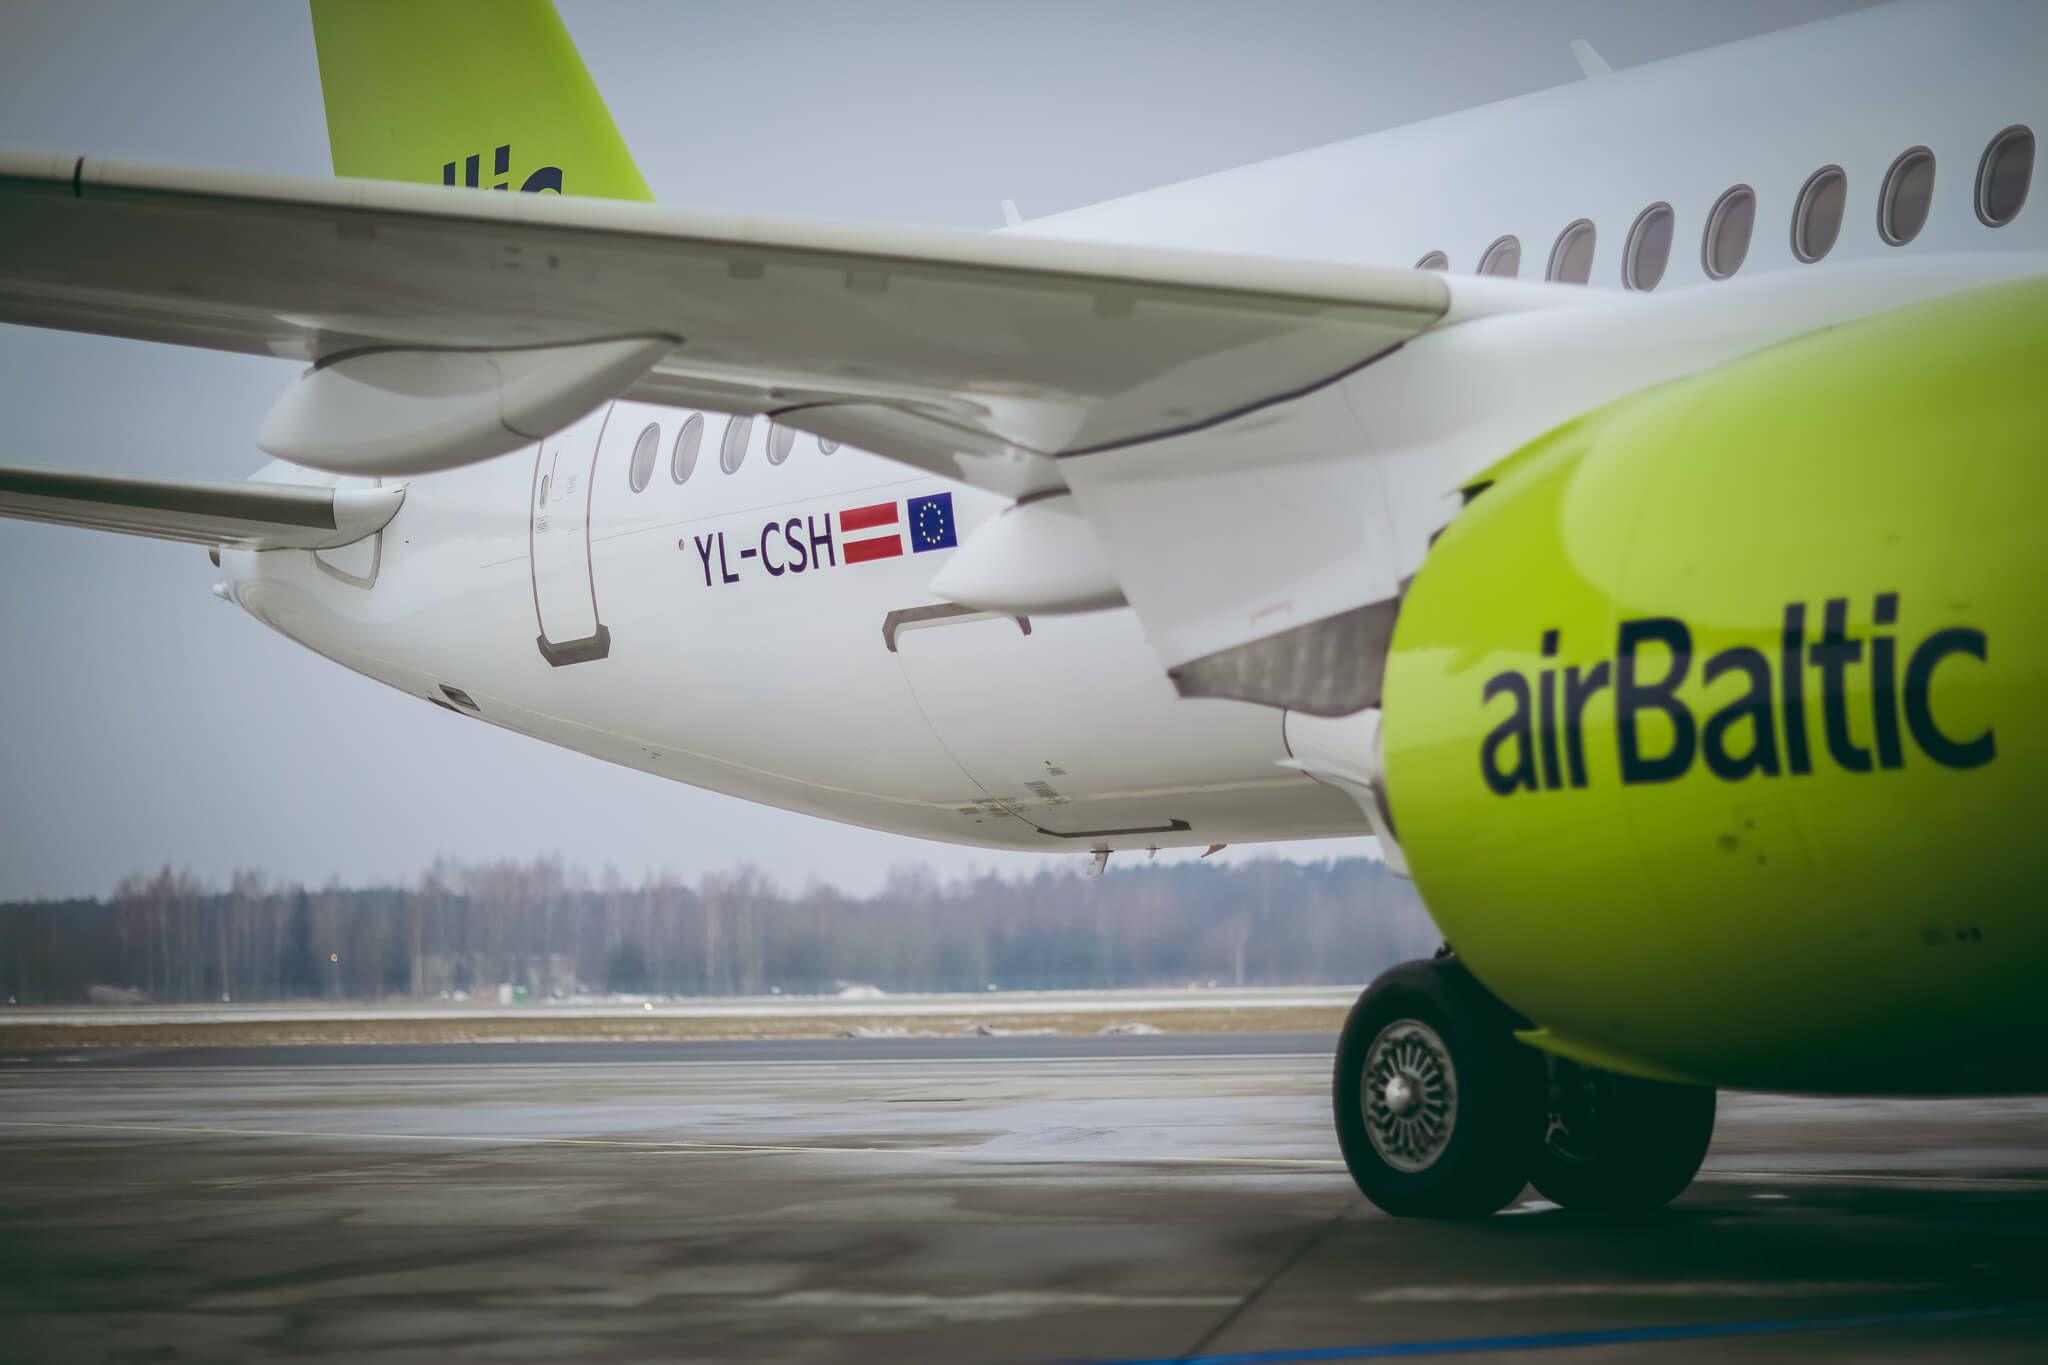 airBaltic takes delivery of an additional CS300